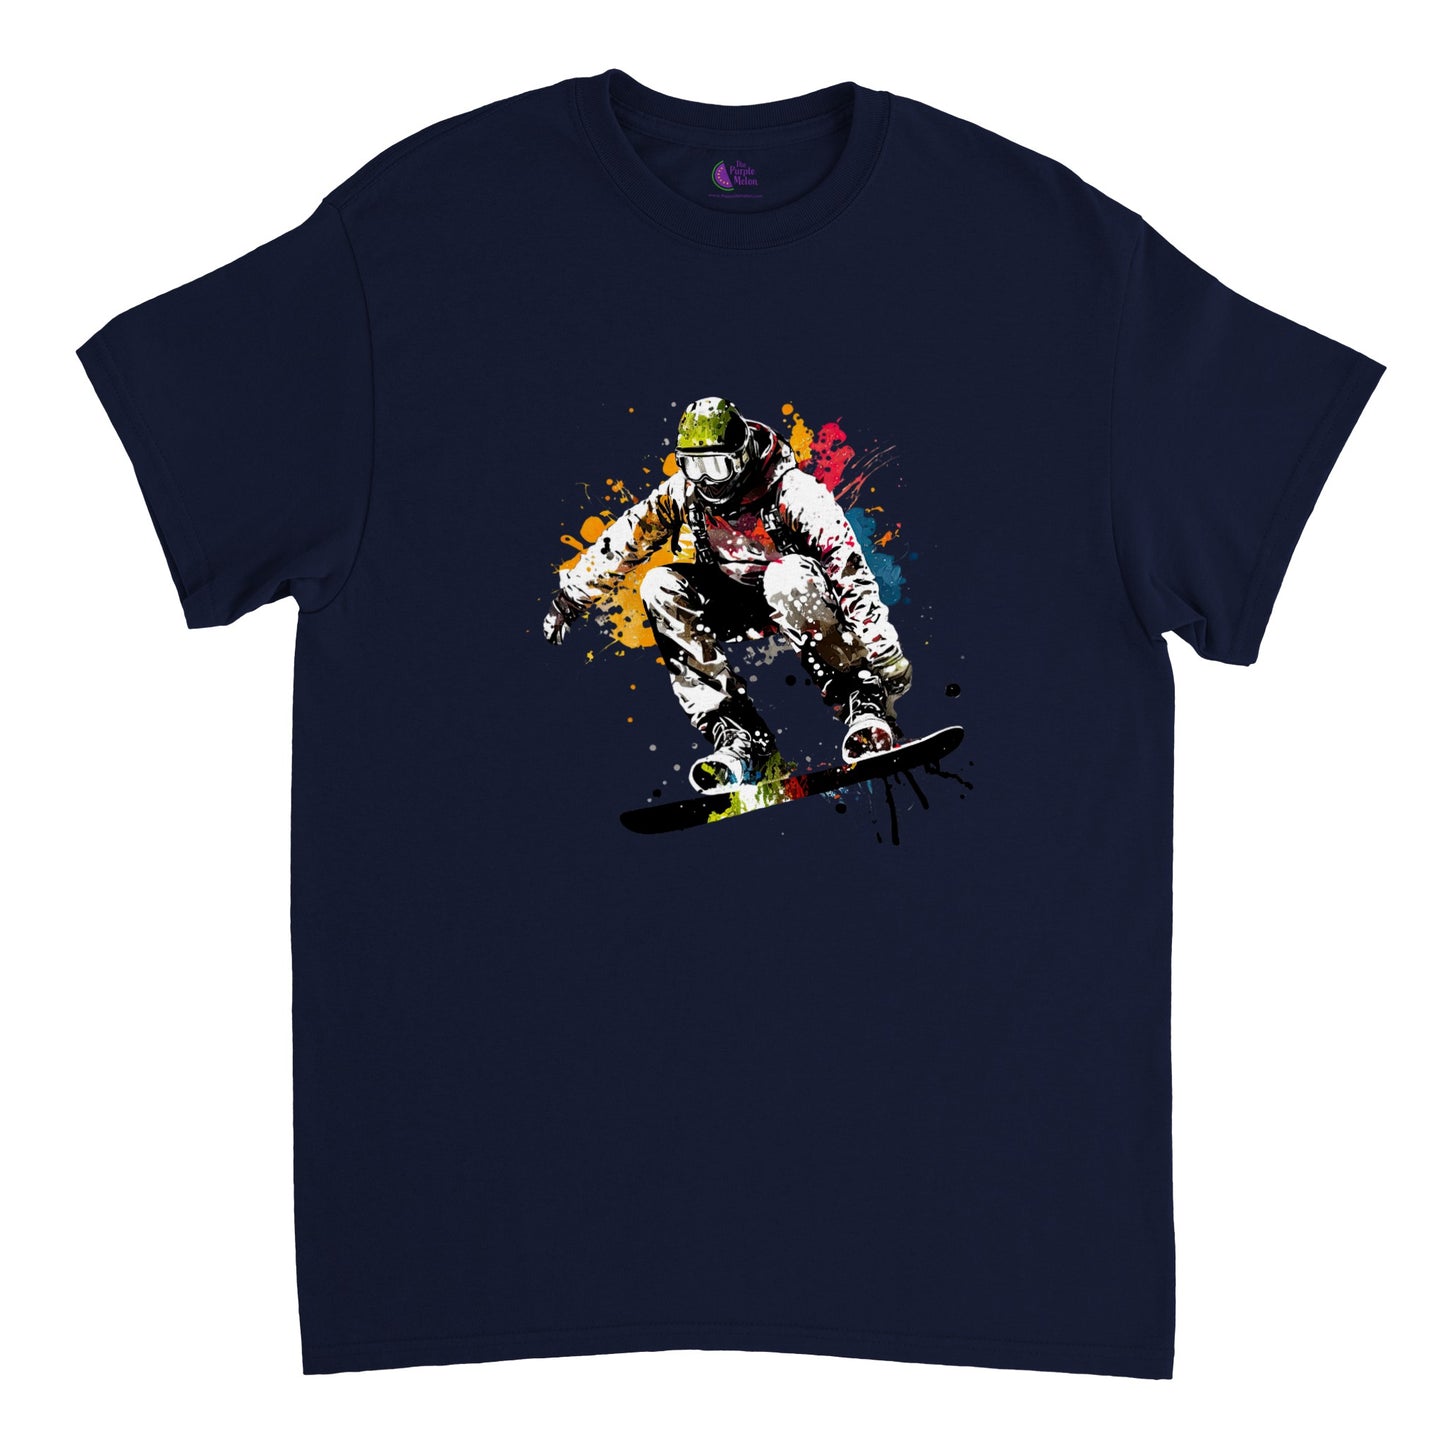 Navy blue t-shirt with a snowboarder print